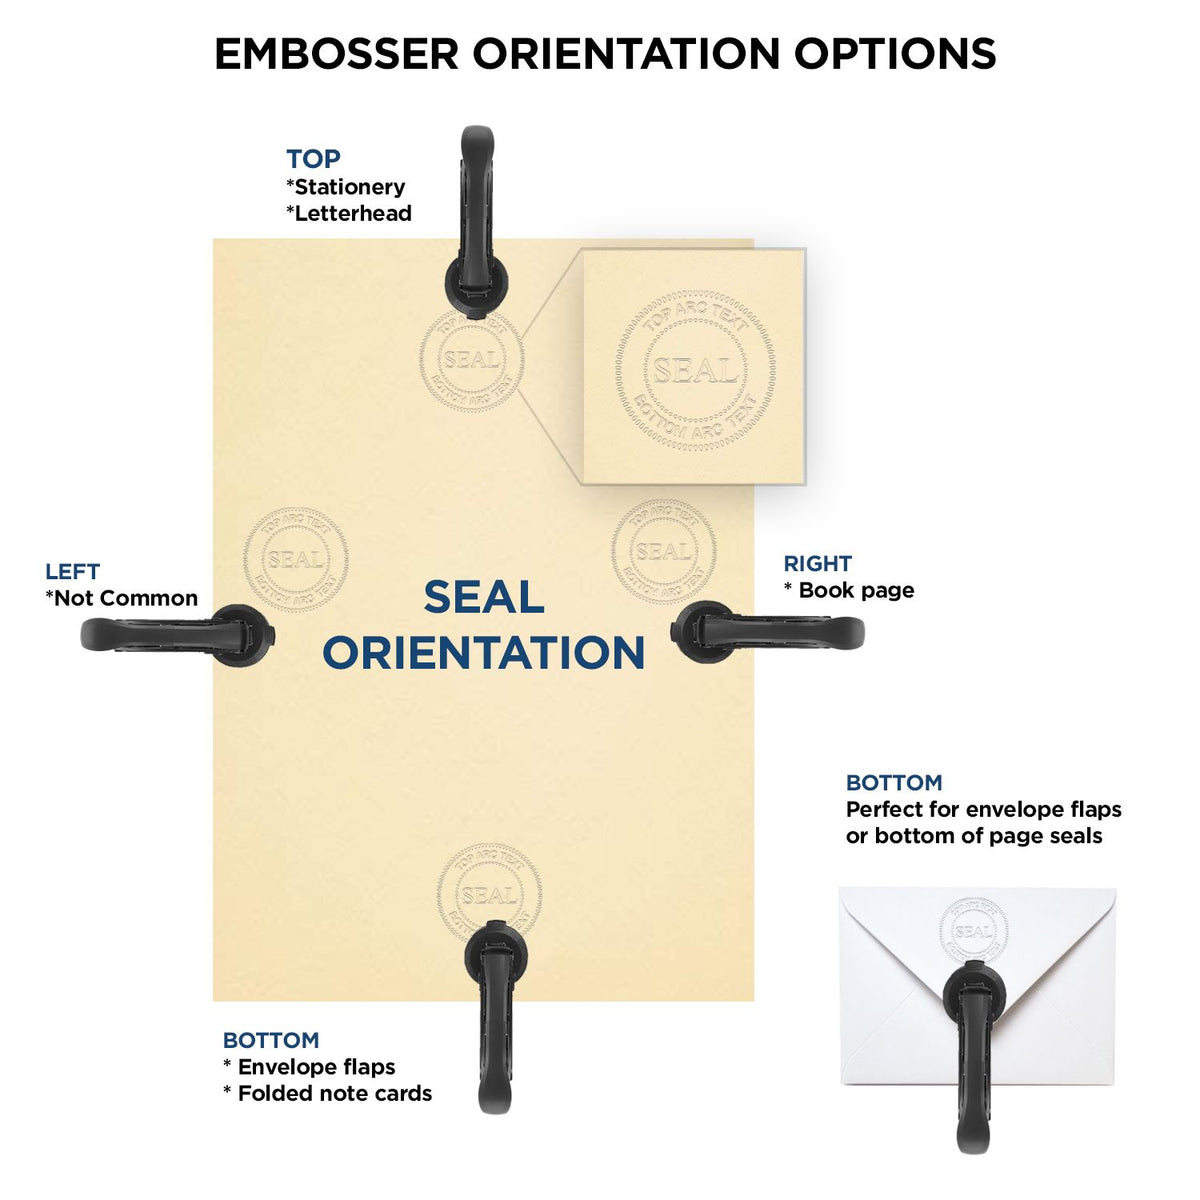 An infographic for the Connecticut Desk Surveyor Seal Embosser showing embosser orientation, this is showing examples of a top, bottom, right and left insert.